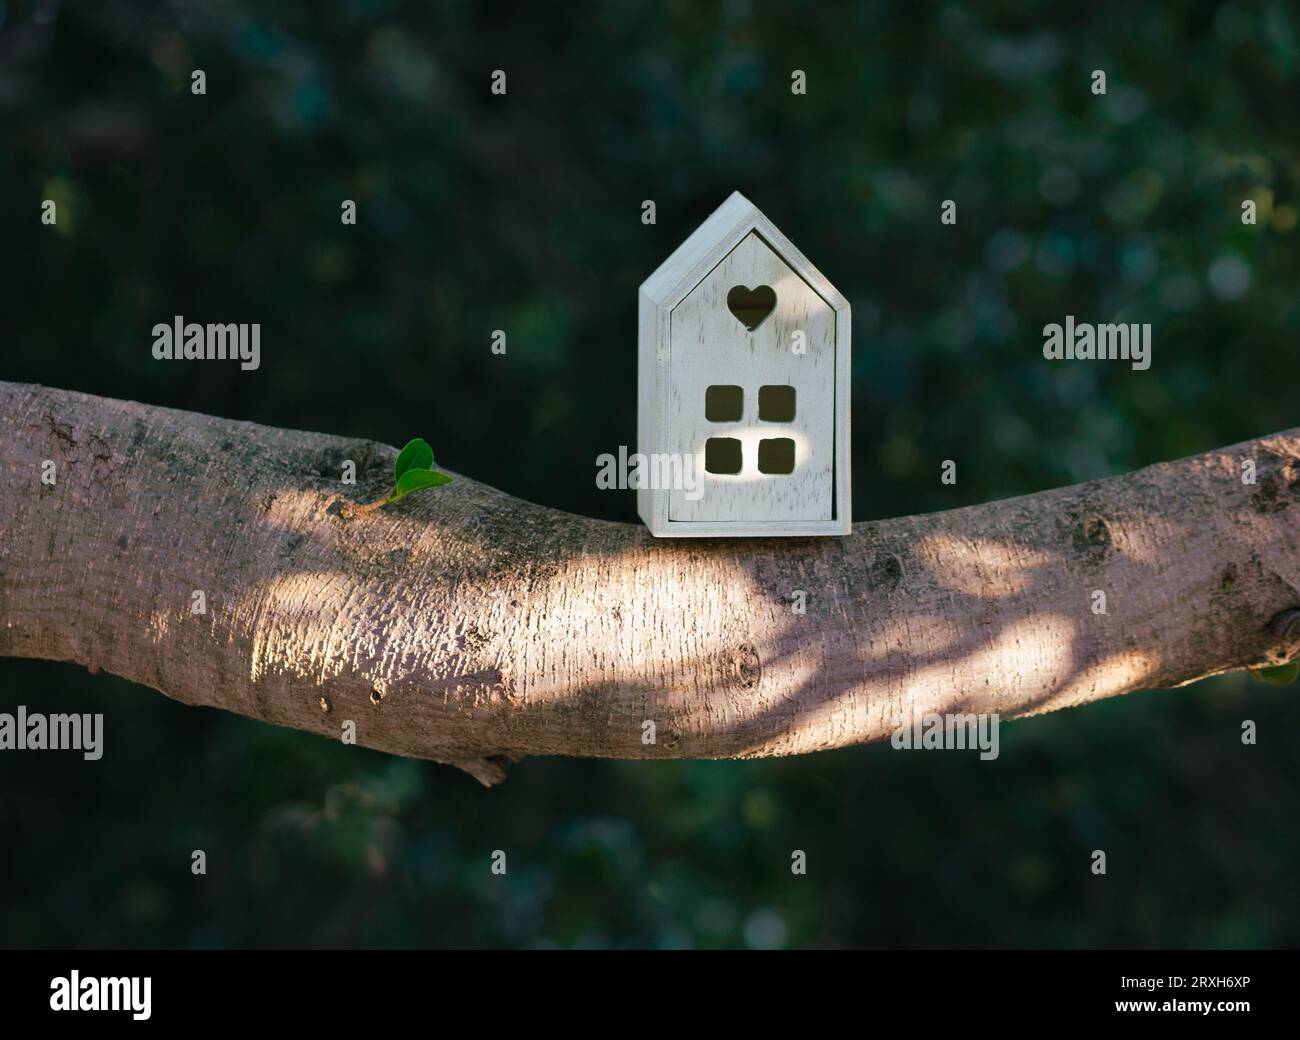 Little wooden house on tree branch. The unvarnished, raw wood of the house stands out in stark contrast against the lush, blurred green background. Stock Photo